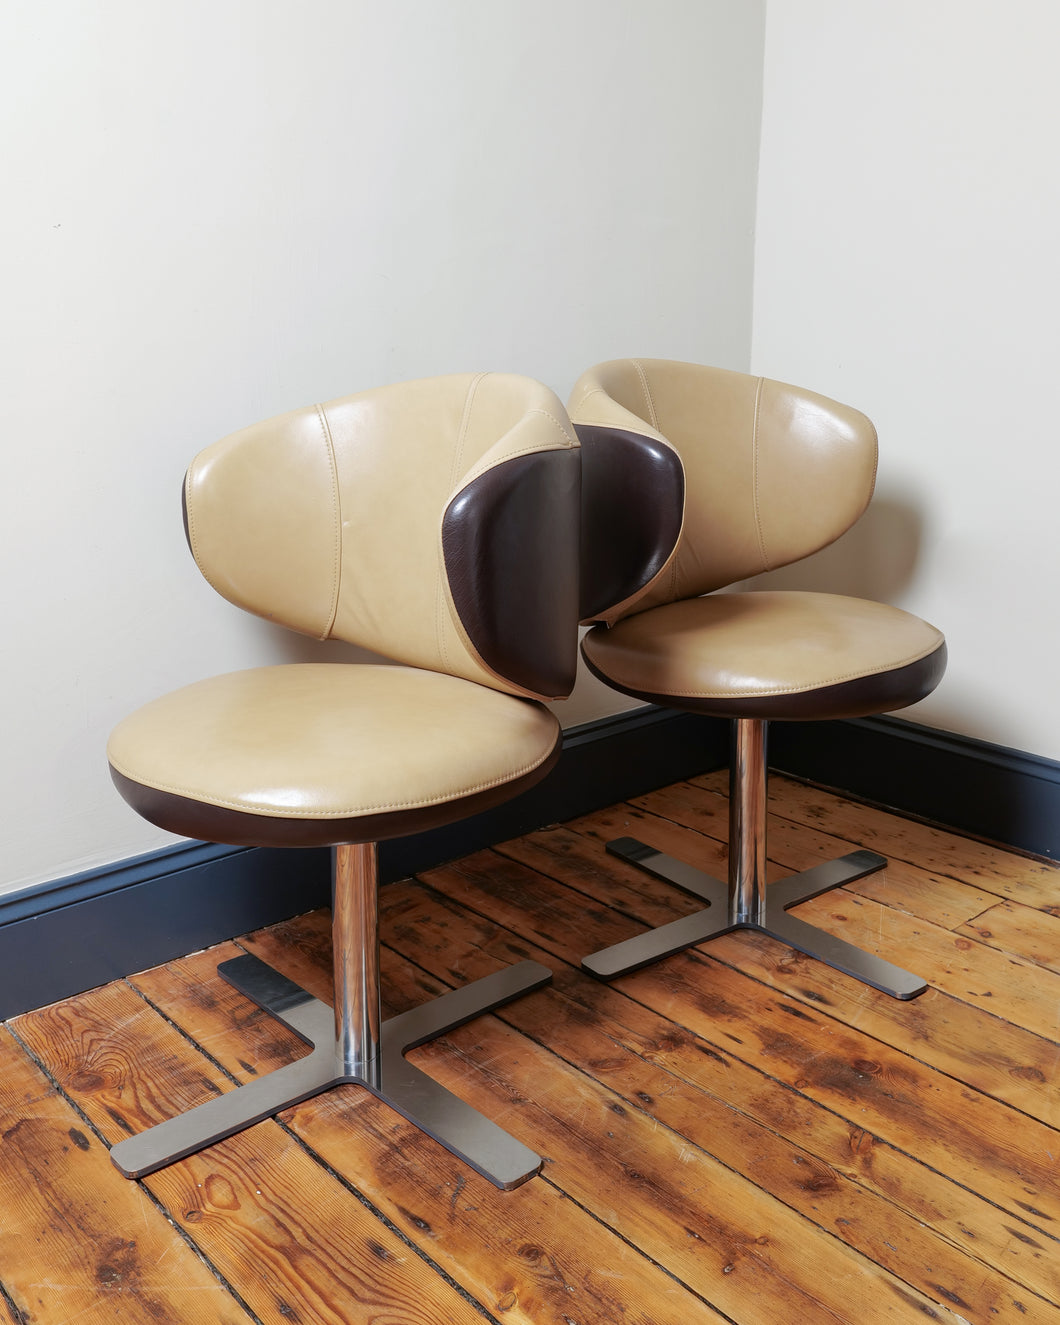 Leather Swivel Chairs